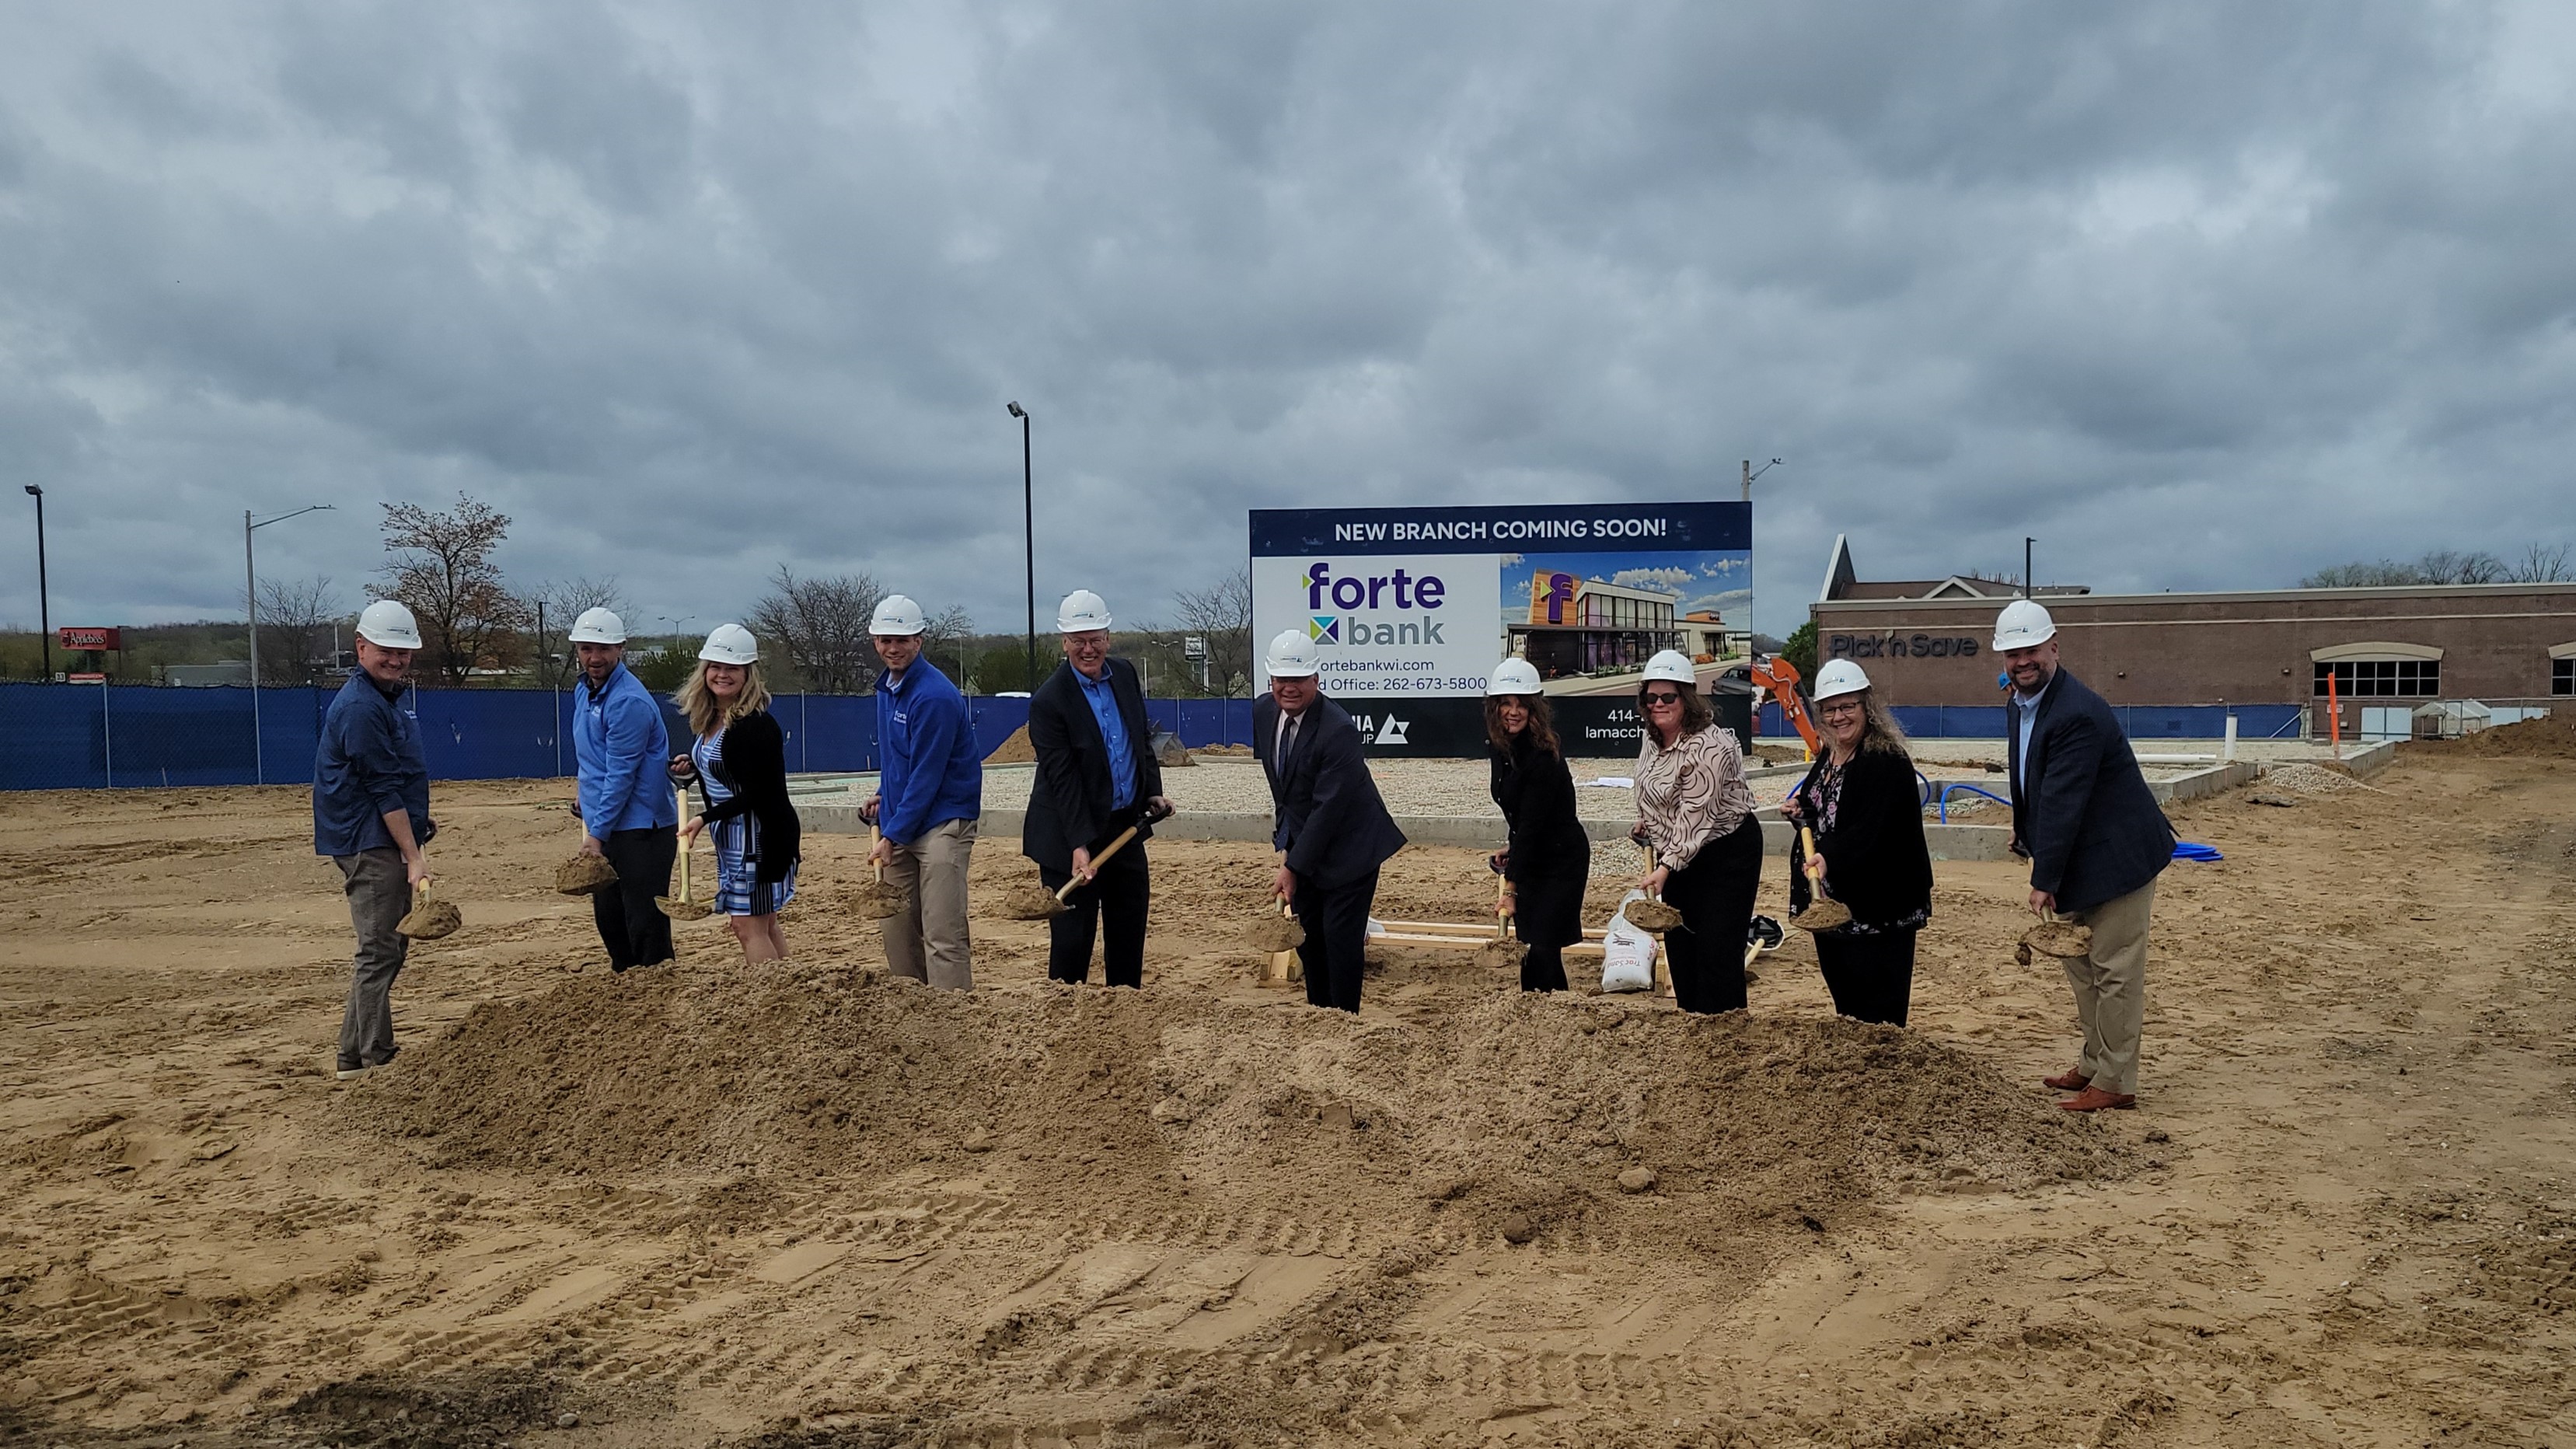 Ten employees of Forte Bank stand at the location of the new West Bend branch holding shovels with dirt at a groundbreaking ceremony.